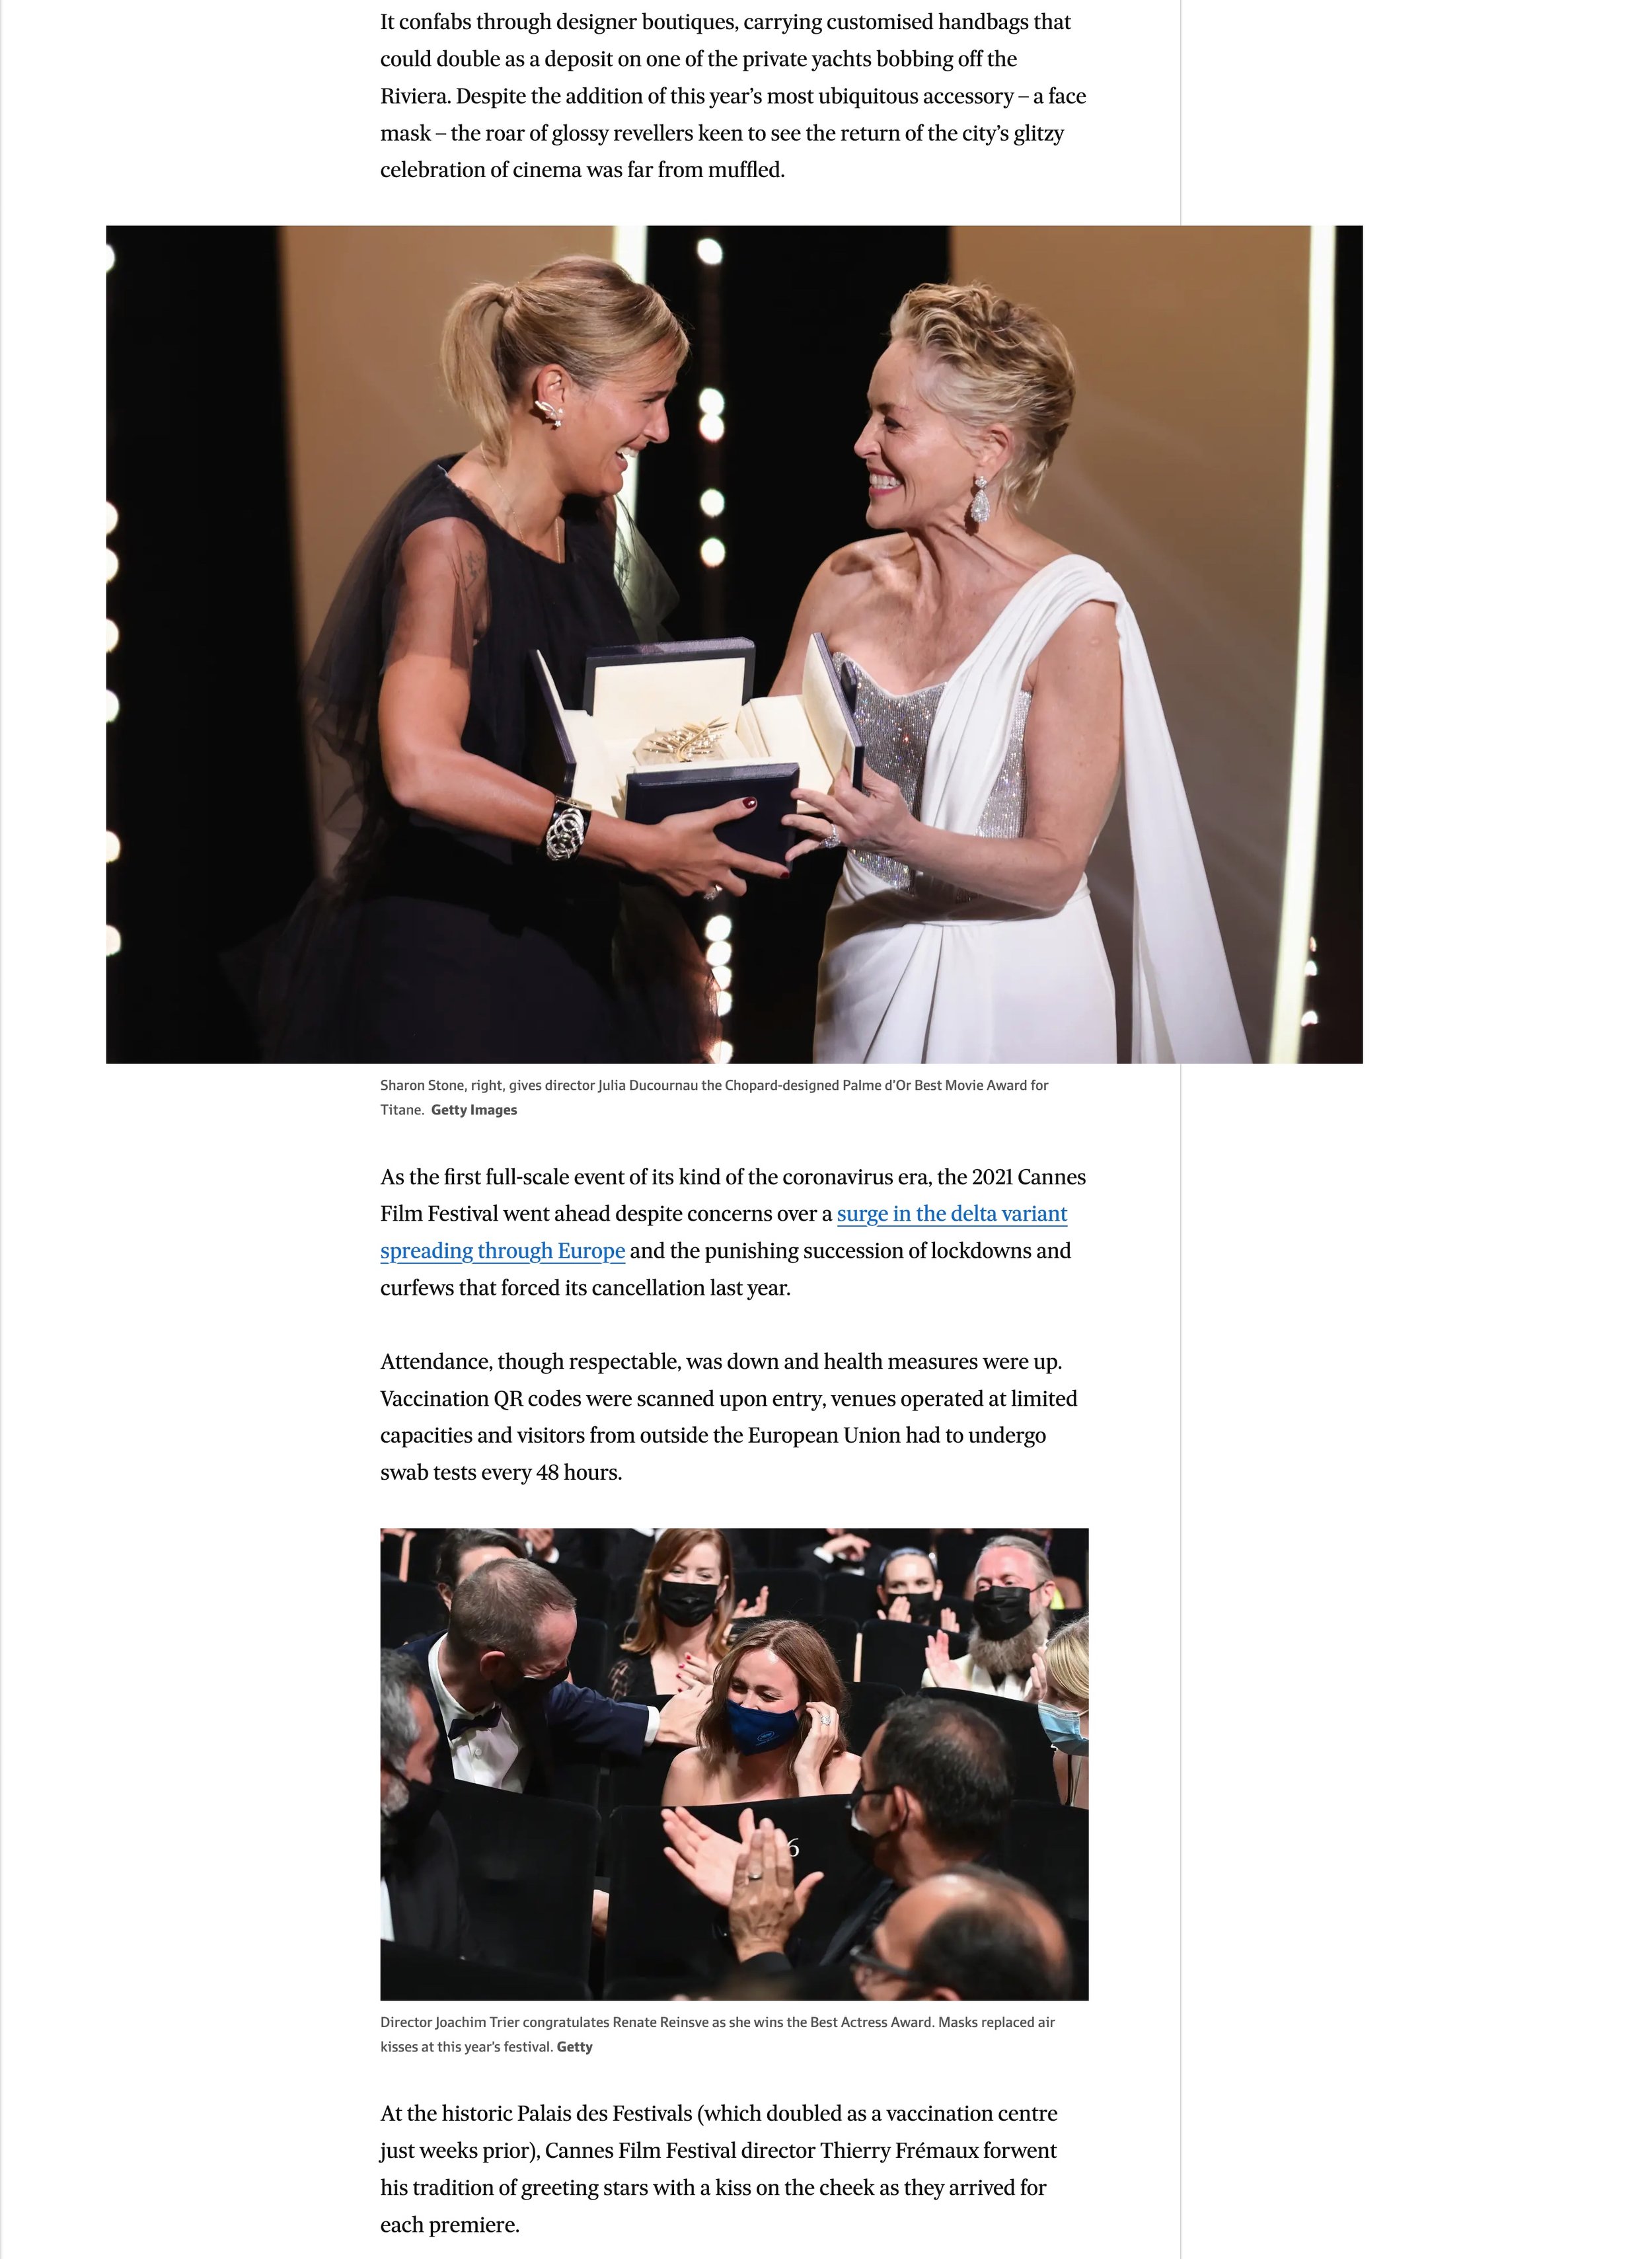 screencapture-afr-life-and-luxury-fashion-and-style-how-to-host-the-world-s-most-glamorous-party-as-a-pandemic-rolls-on-20210719-p58b01-2022-05-16-15_42_292.jpg